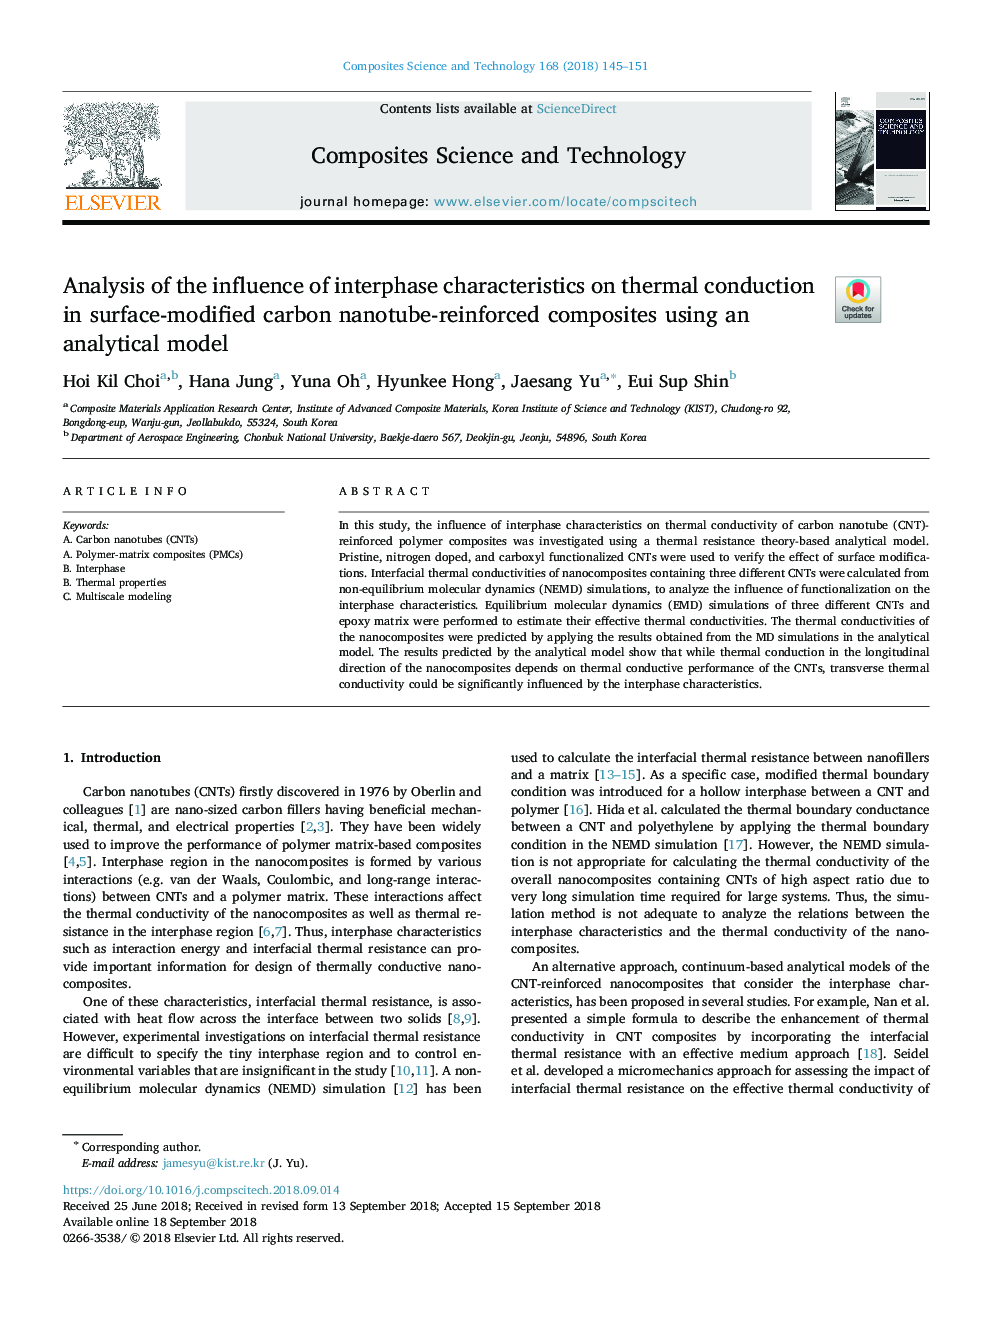 Analysis of the influence of interphase characteristics on thermal conduction in surface-modified carbon nanotube-reinforced composites using an analytical model